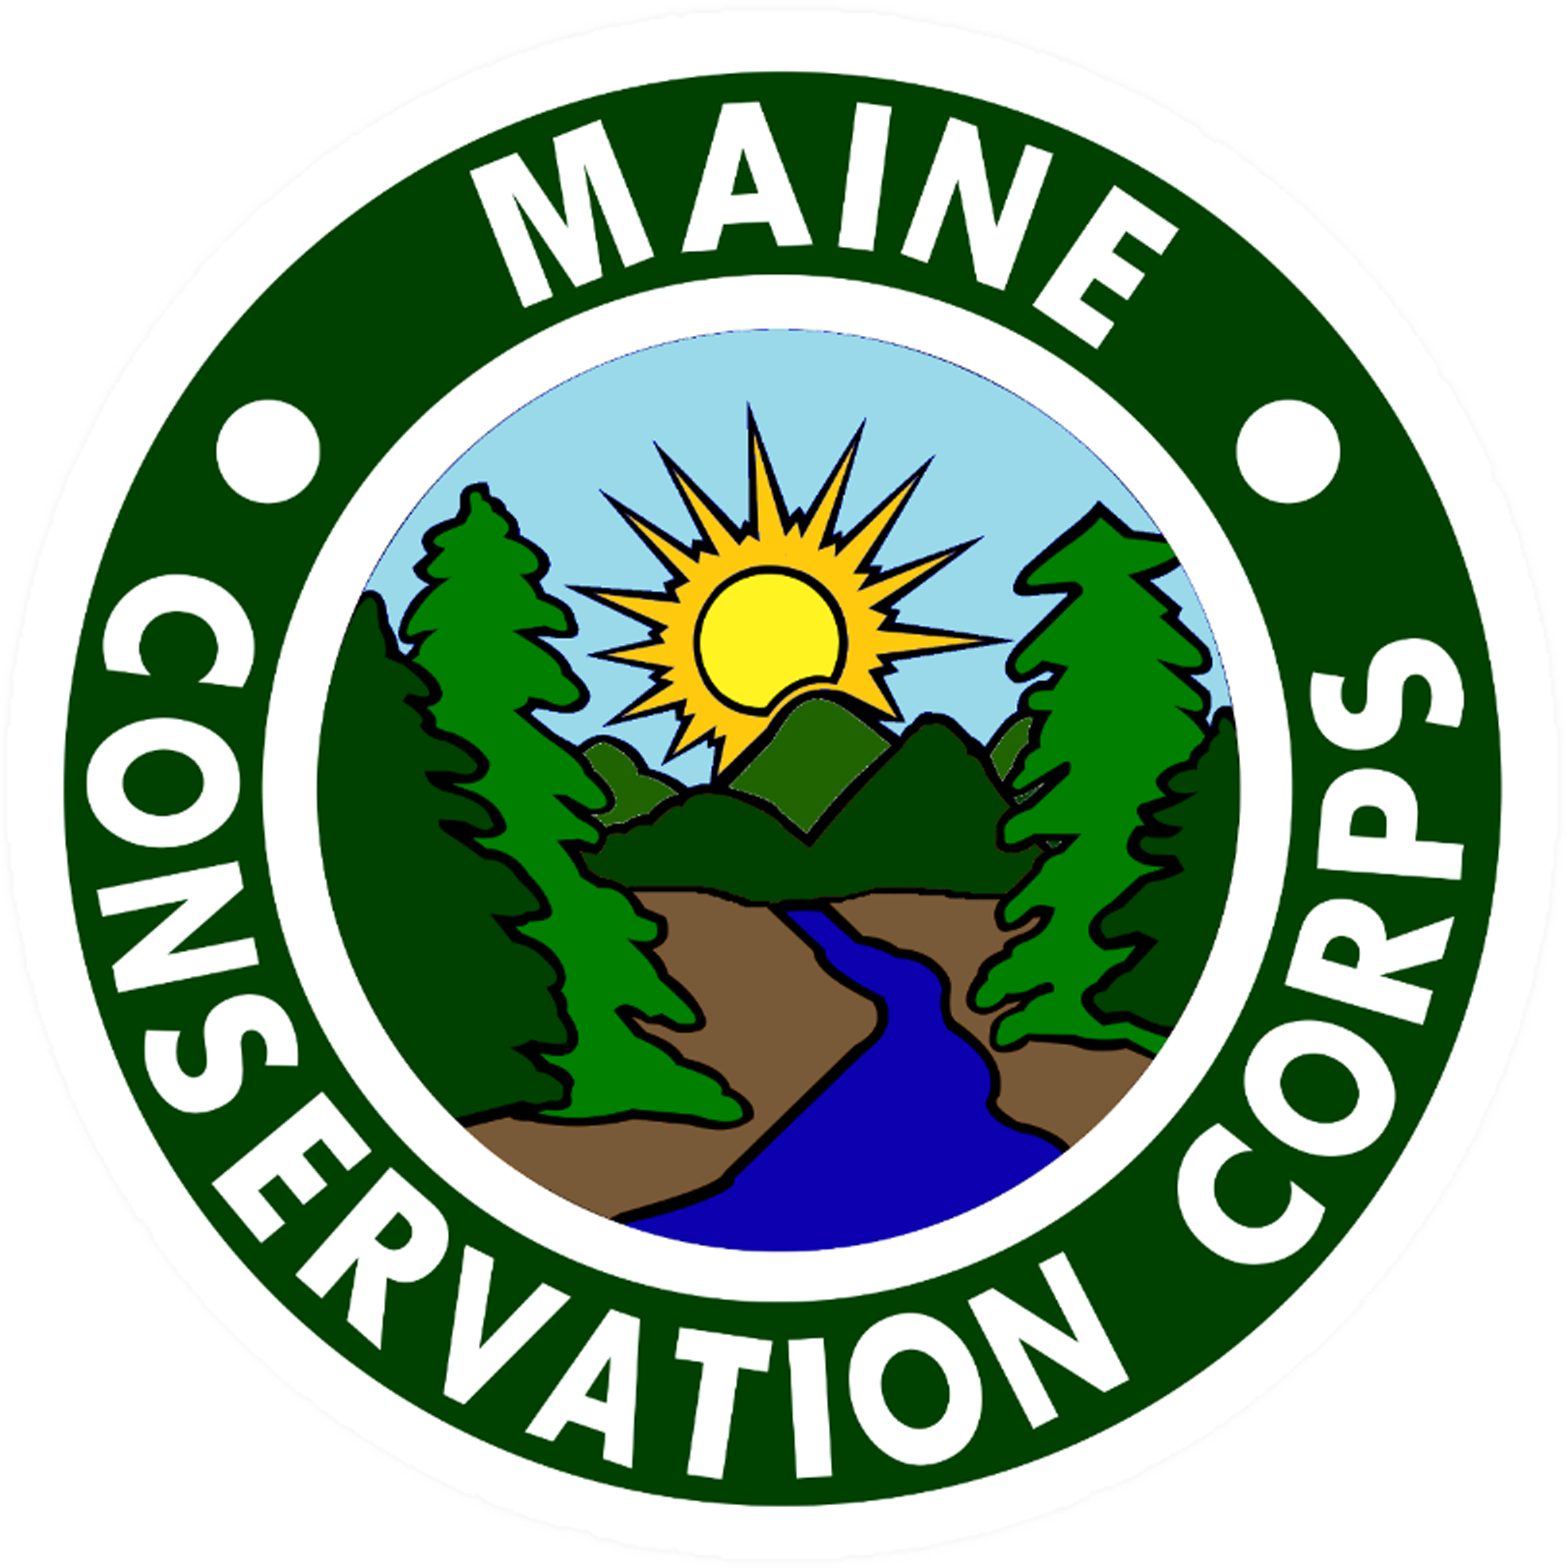 Maine Conservation Corps logo